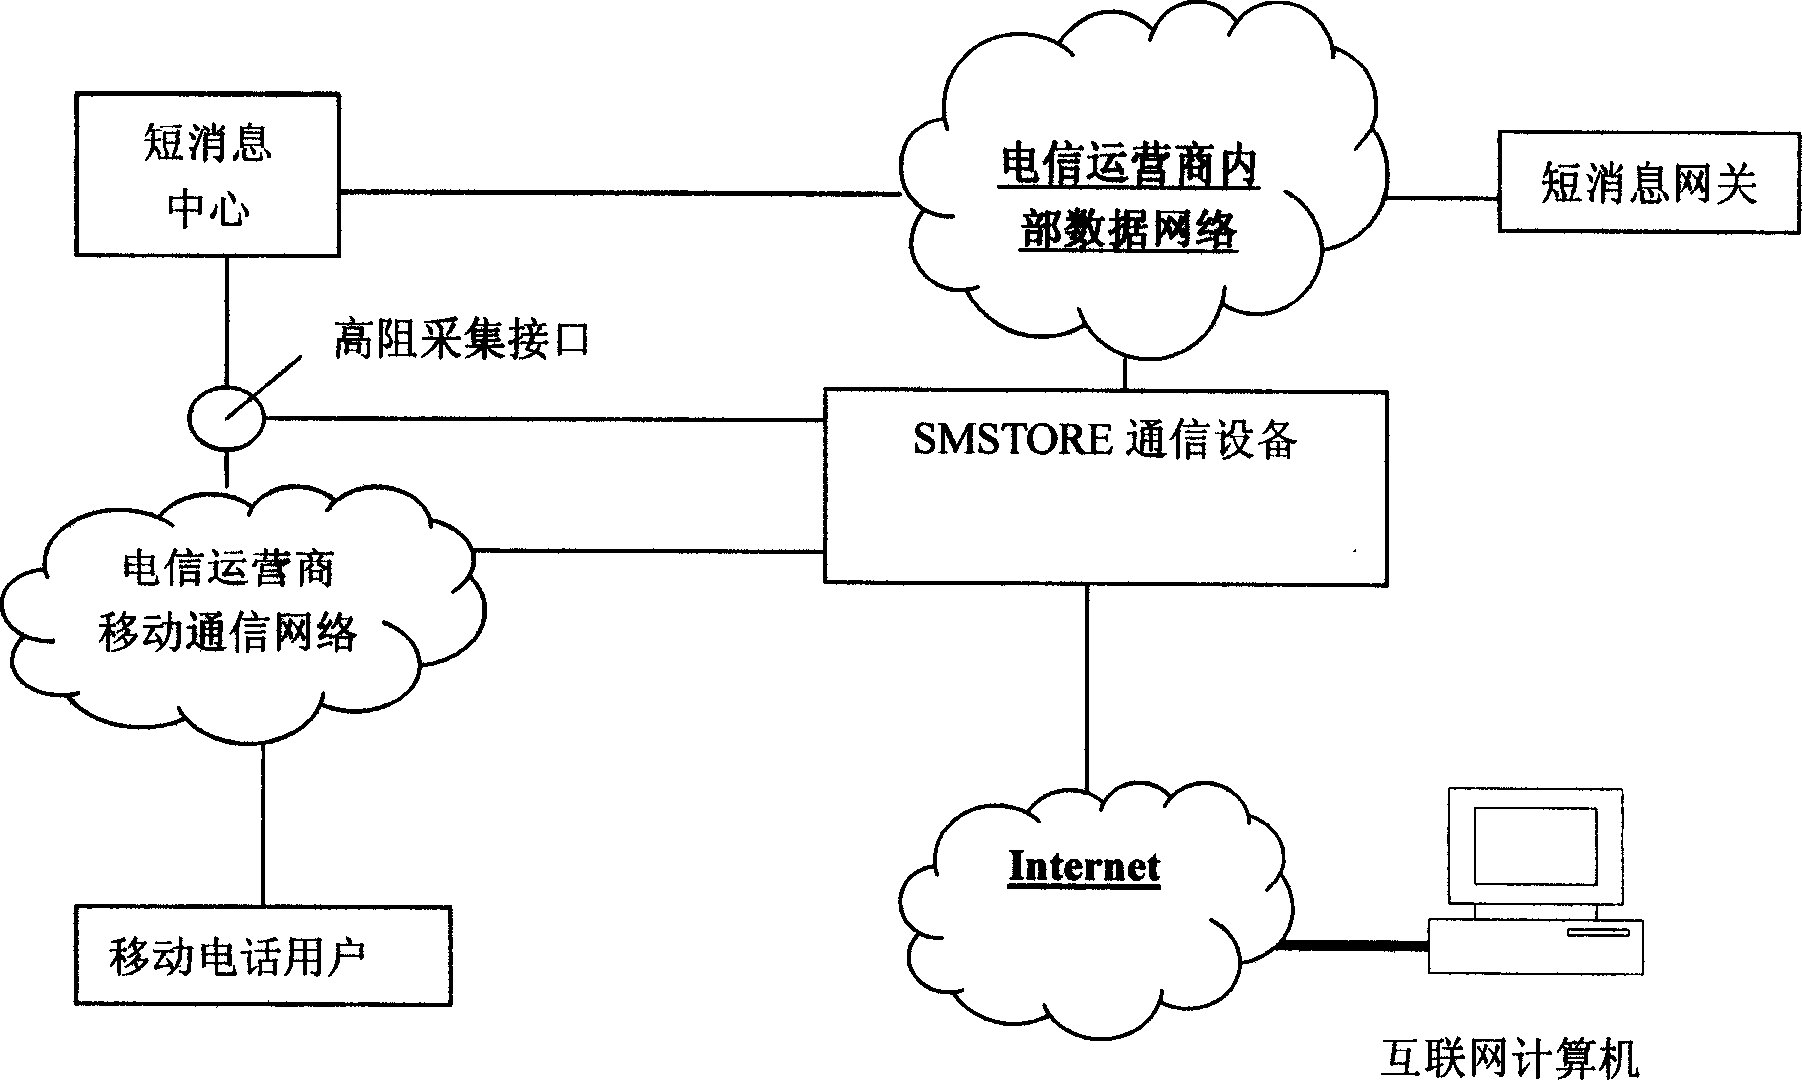 Apparatus and method for automatic network storage of short messages received by mobile telephone